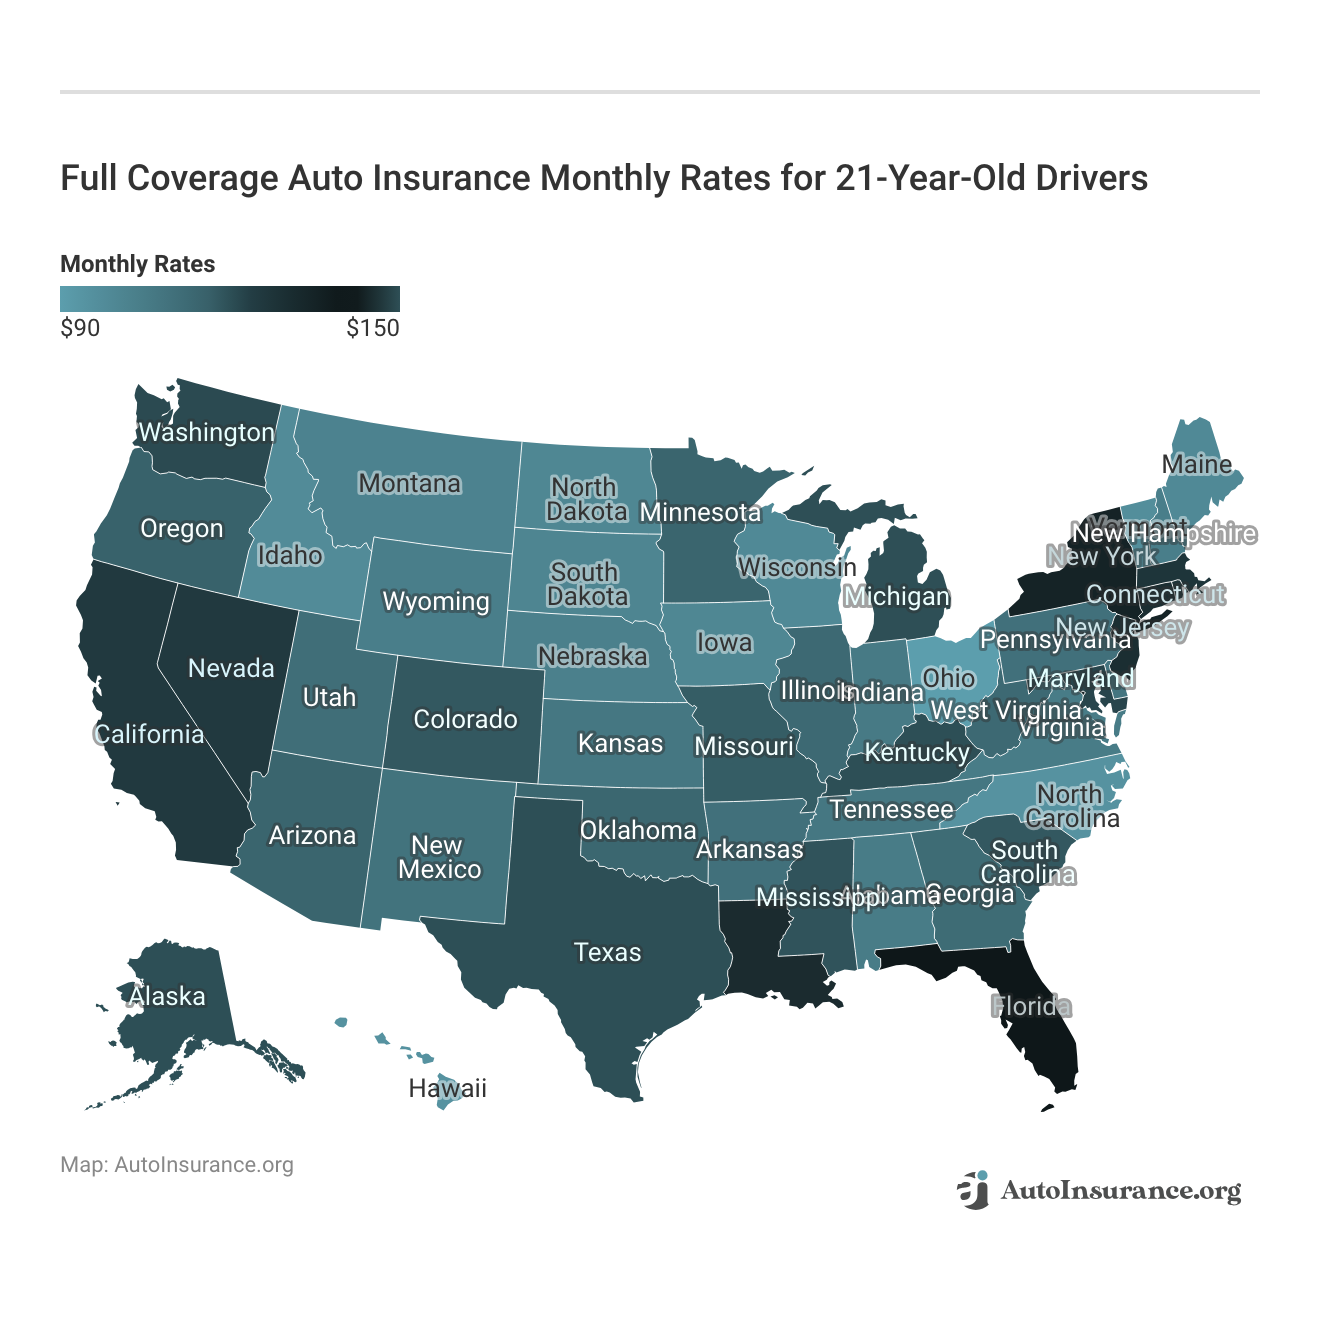 <h3>Full Coverage Auto Insurance Monthly Rates for 21-Year-Old Drivers</h3>